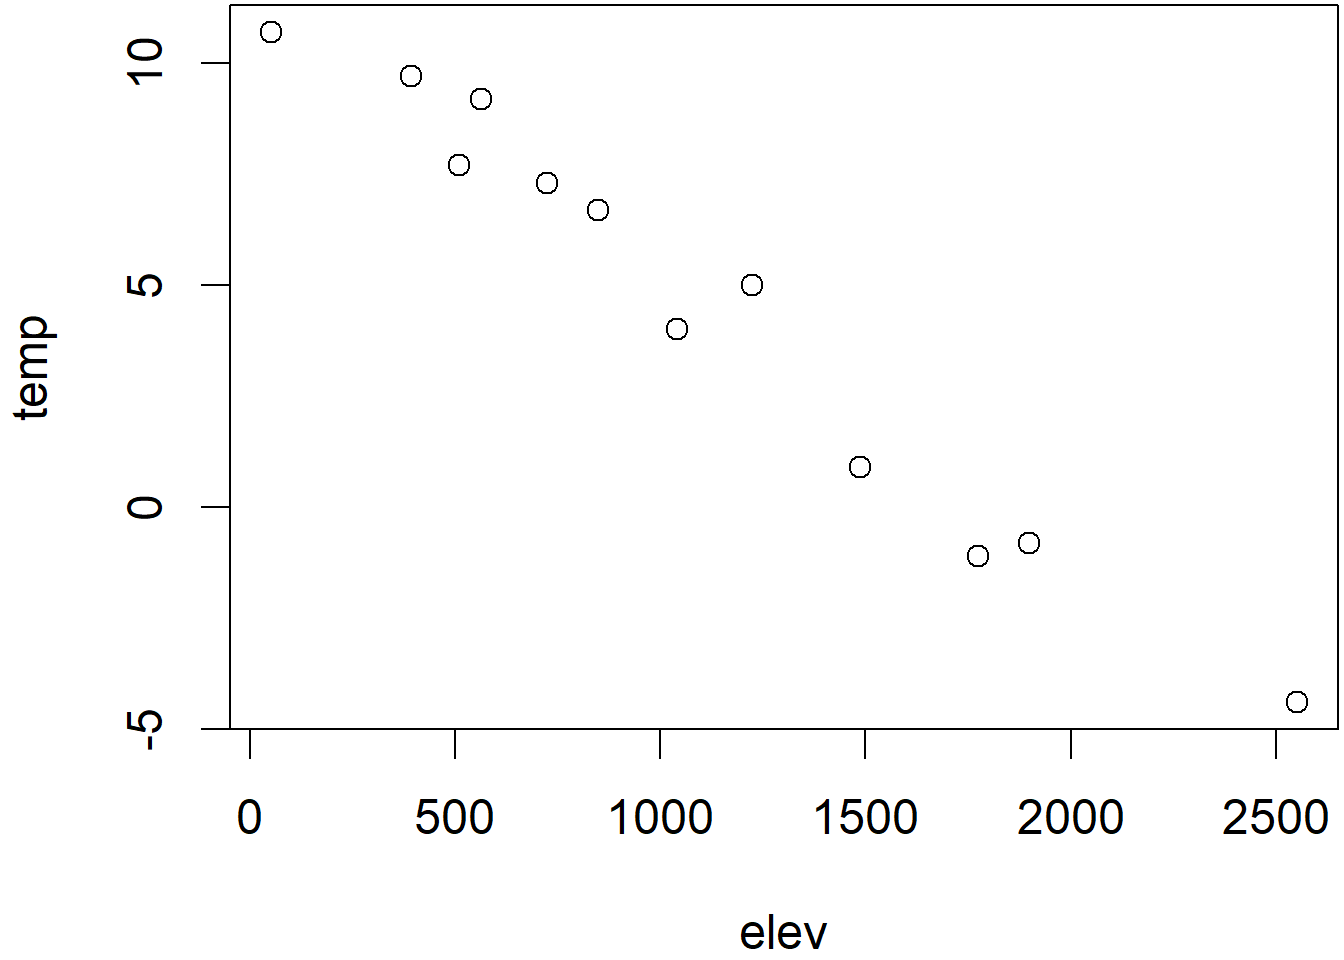 Temperature plotted by index (left) and elevation (right)